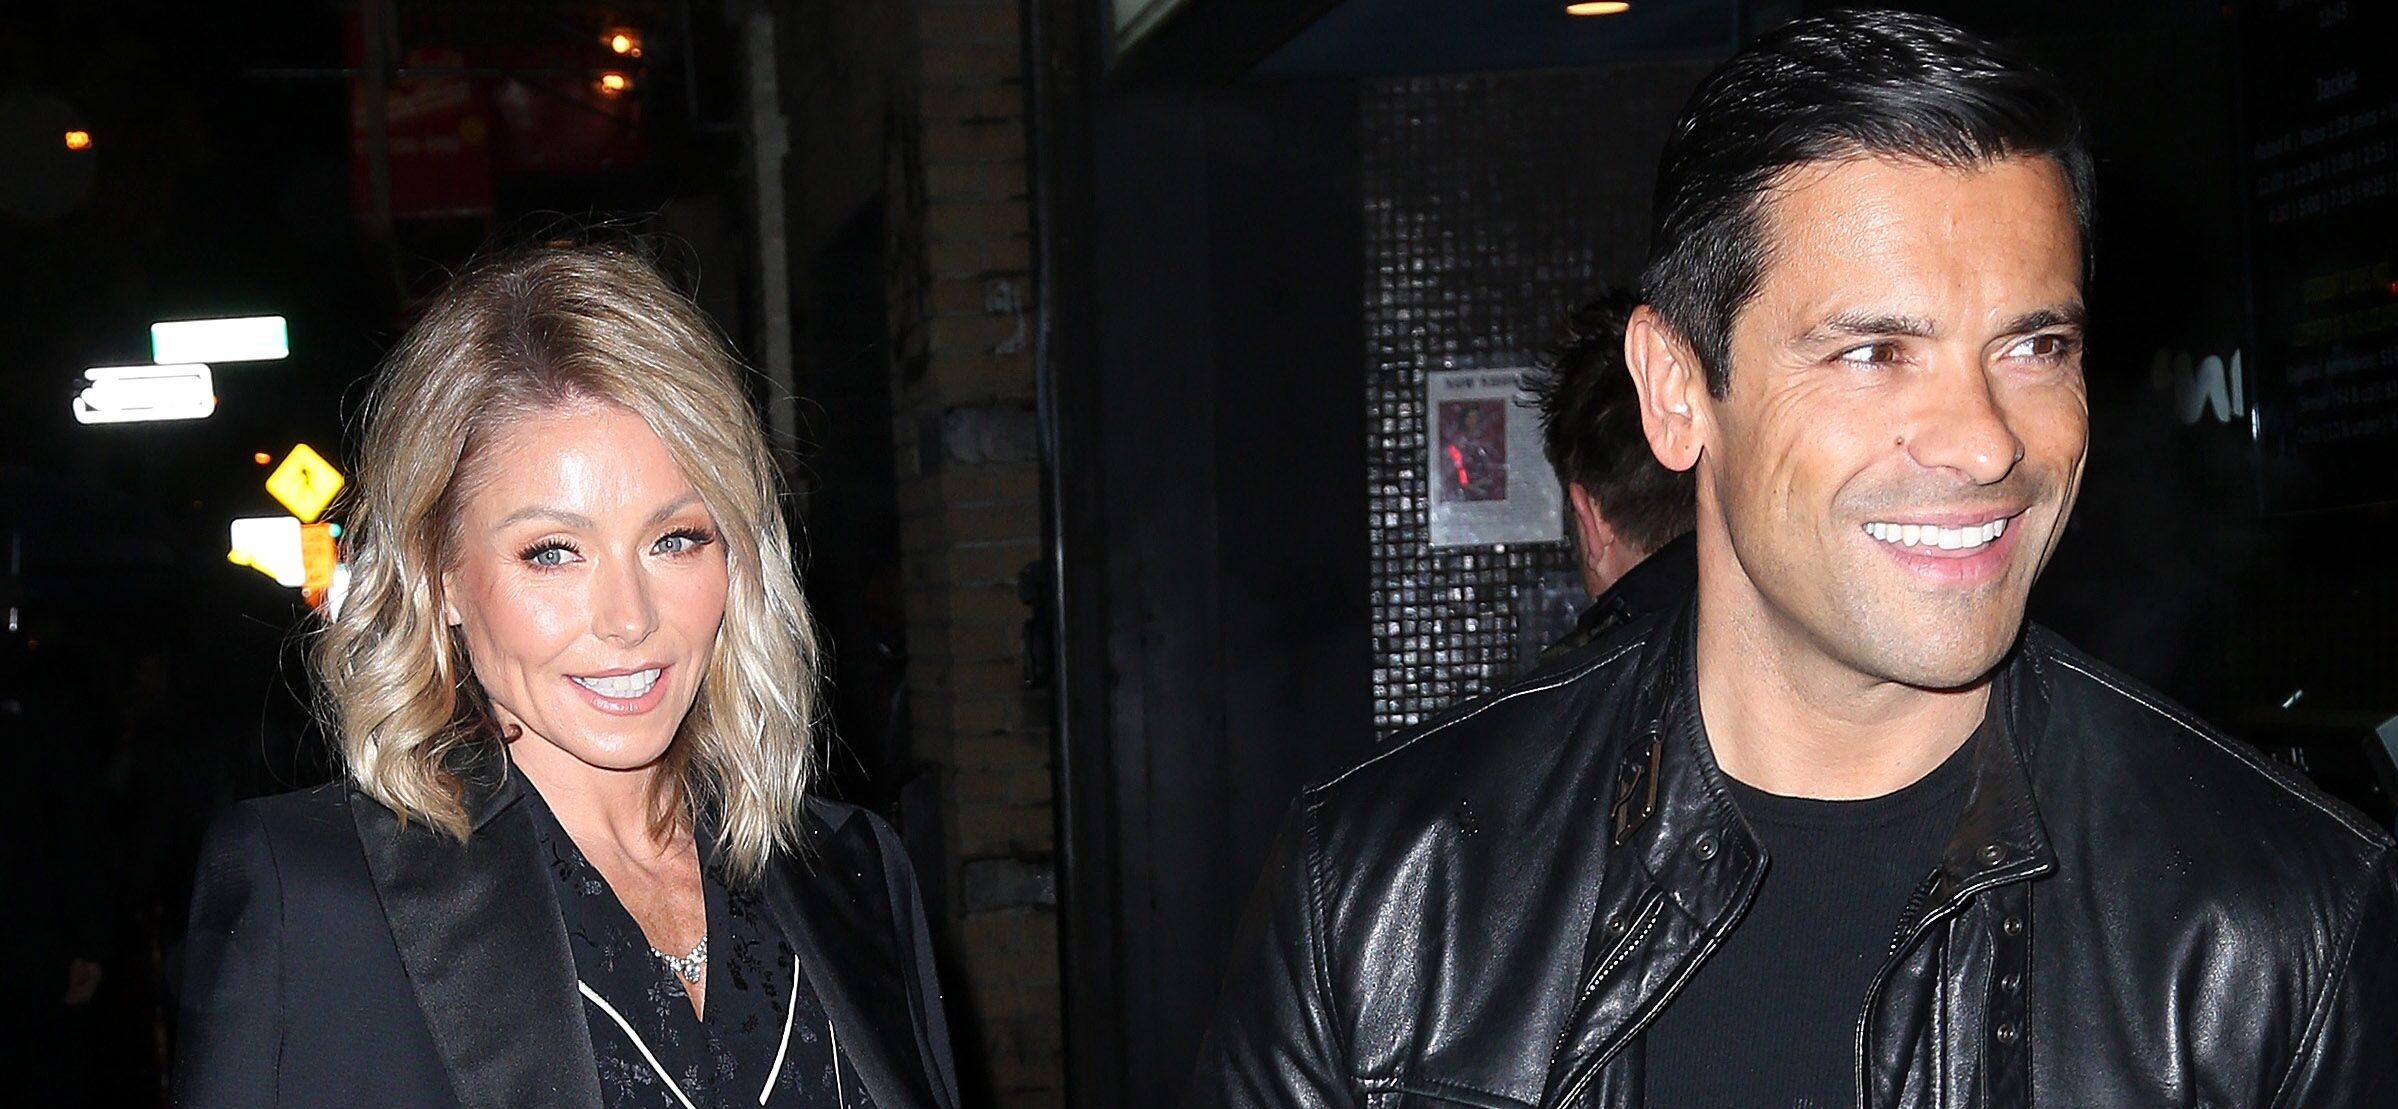 Mark Consuelos Is New Co-Host Of ‘Live With Kelly And… Mark’